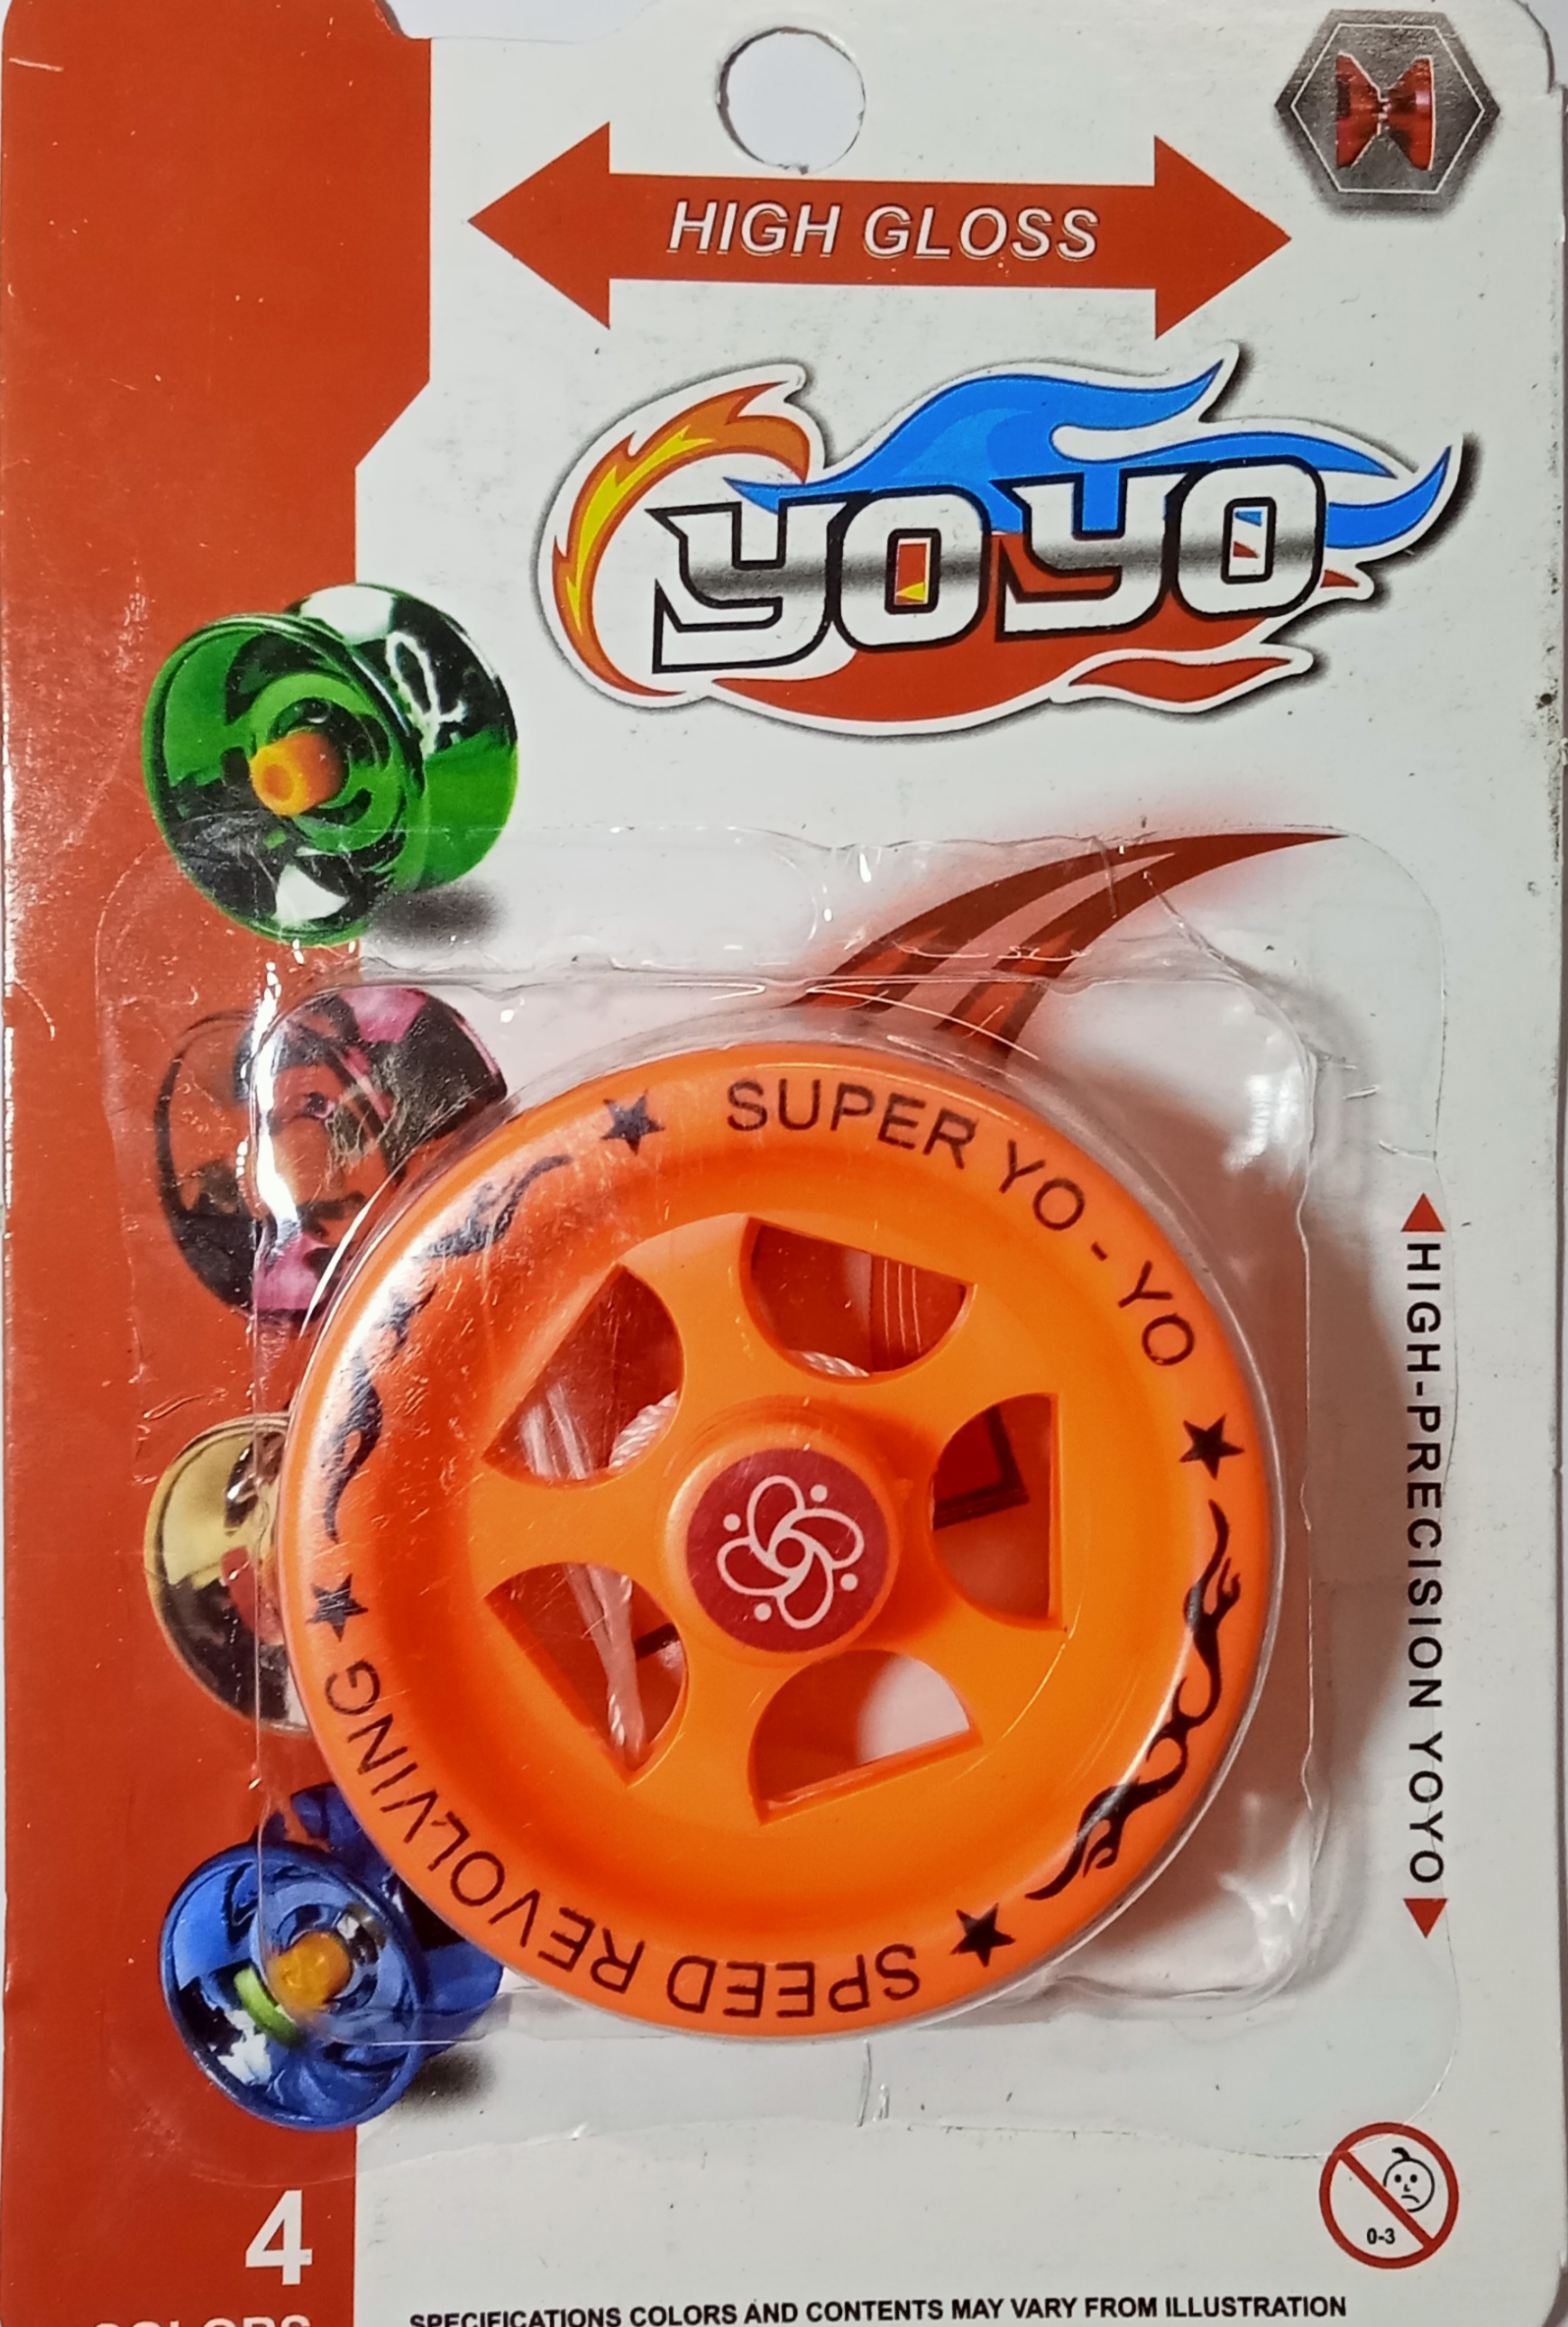 High Speed yoyo Kids Toy (Color May Vary)